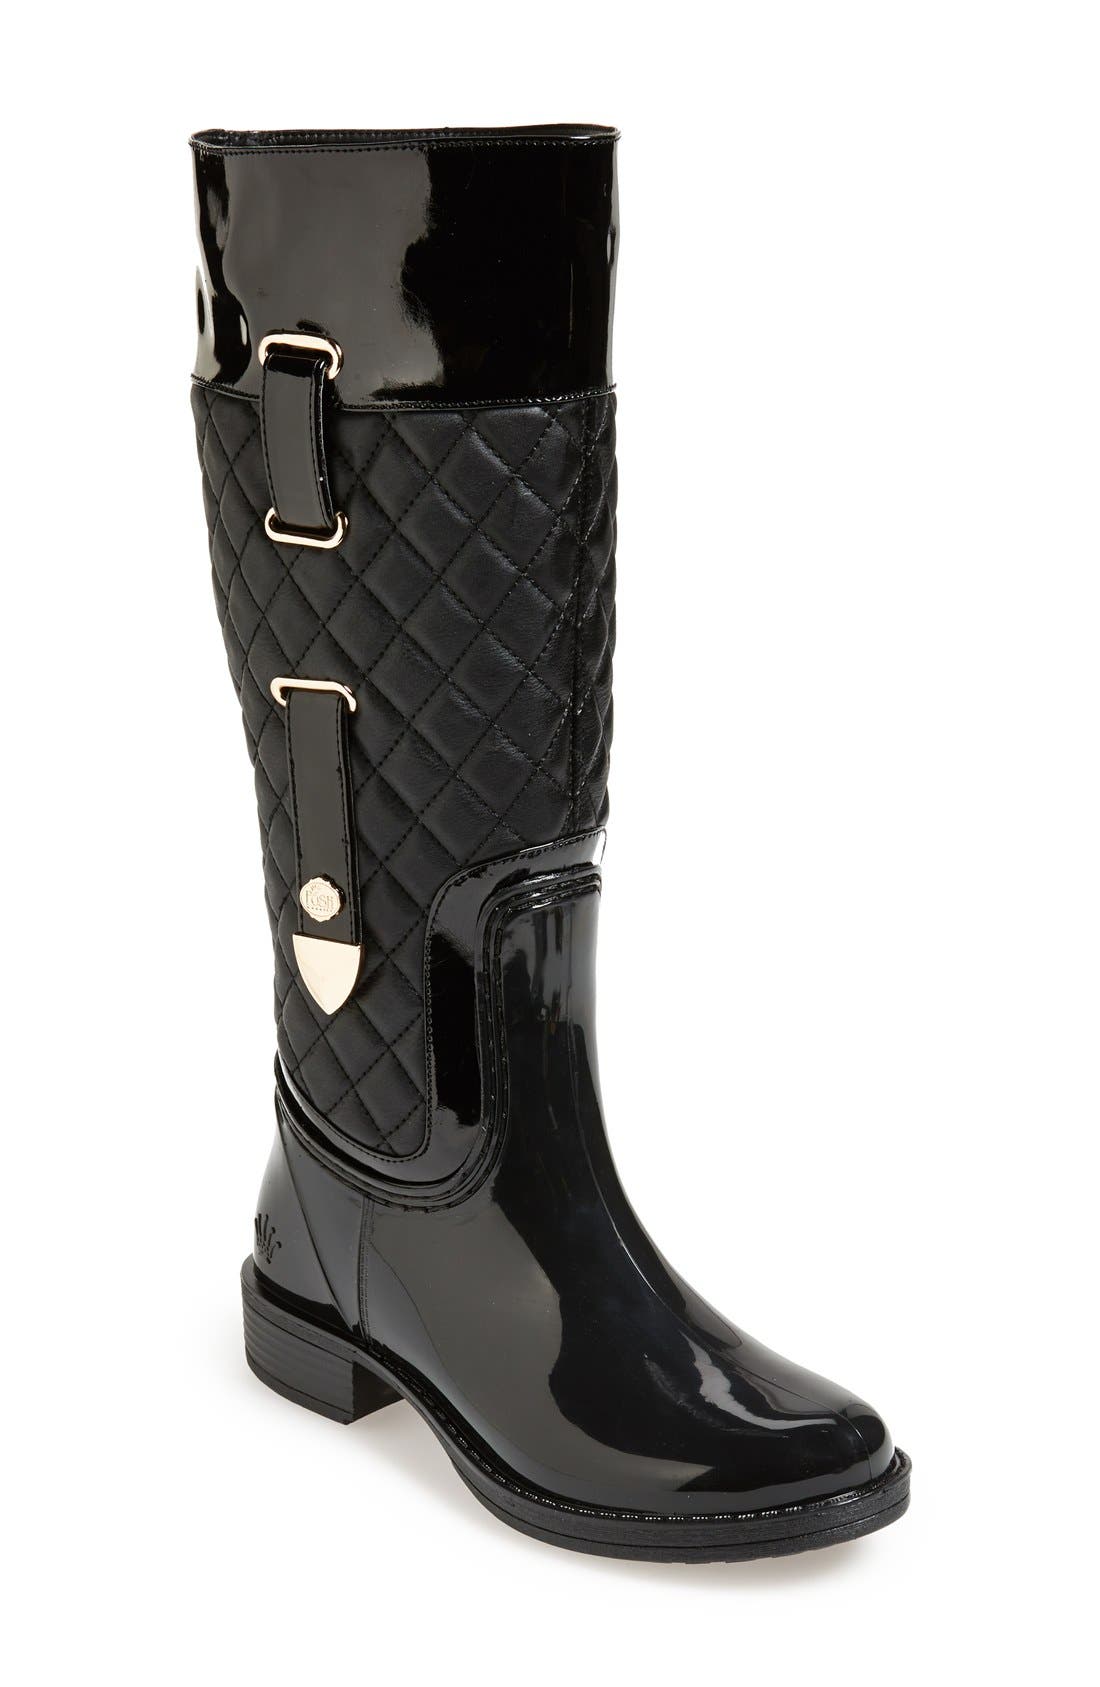 Posh Wellies 'Quizz' Quilted Tall Rain 